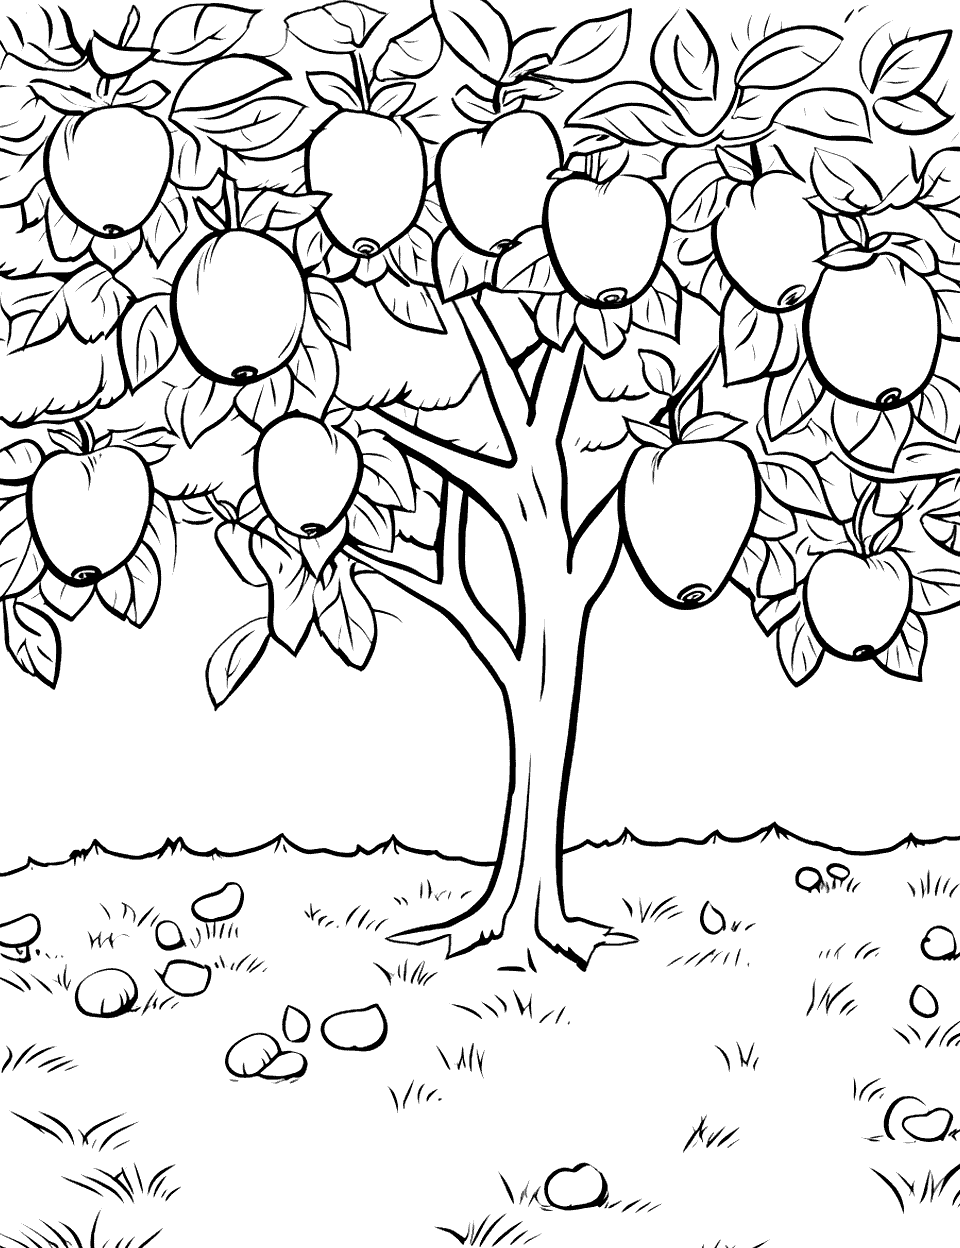 Fruit Tree Farm Coloring Page - A fruit tree with ripe fruits hanging from the branches.